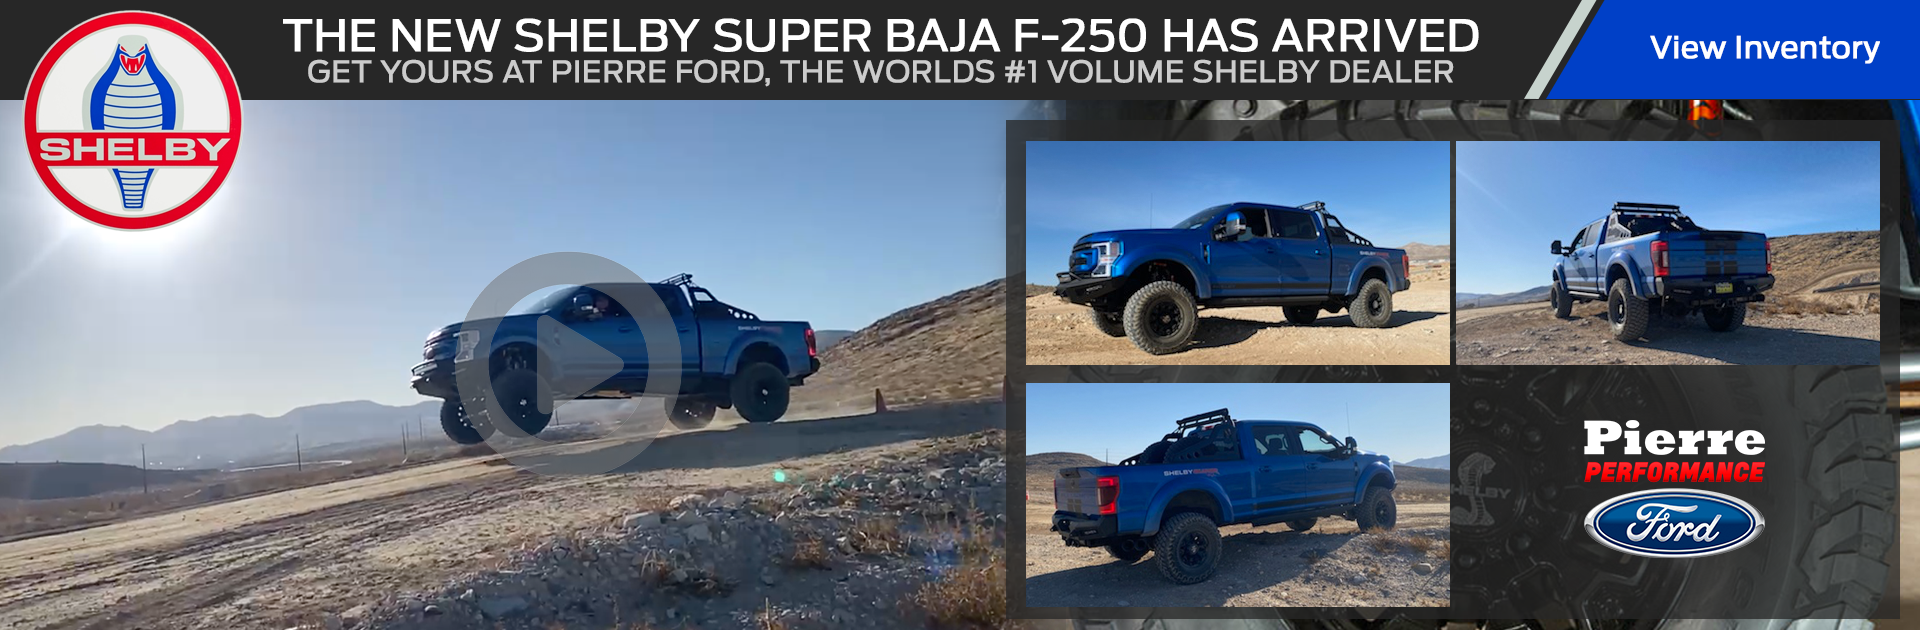 The New 2021 Shelby Super Baja F-250 Has Arrived